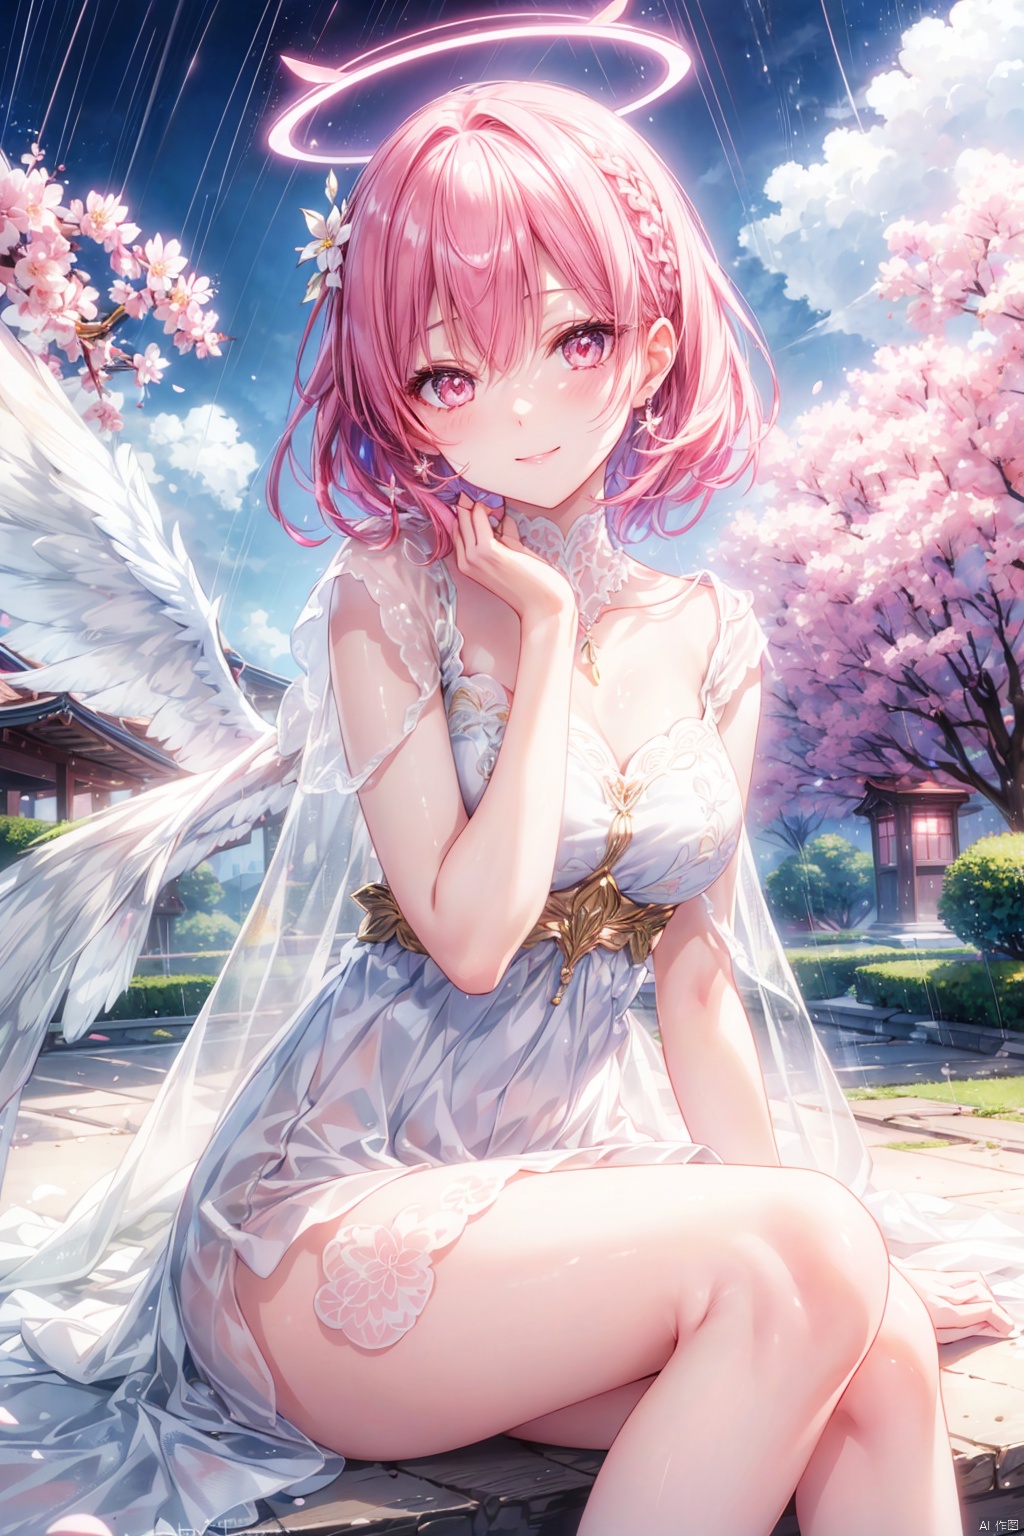 misono mika, pink hair, golden eyes, wings, halo, white dress,
(masterpiece), (best quality), (ultra-detailed), wide field of view, medium full shot, depth of field, cinematic lighting, beautiful furniture and decorations, vivid colors and sparkling effects, solo, outdoors, sky, cloud, blue sky, cloudy sky, horizon, sitting down at a flower arch garden, sakura, spring season, fine skin, peachy blush, lips, expressive eyes, sparkling eyes, elegant, happy, smile, rainy day, professional lighting, character is slightly towards the right, posing for the camera, open stance